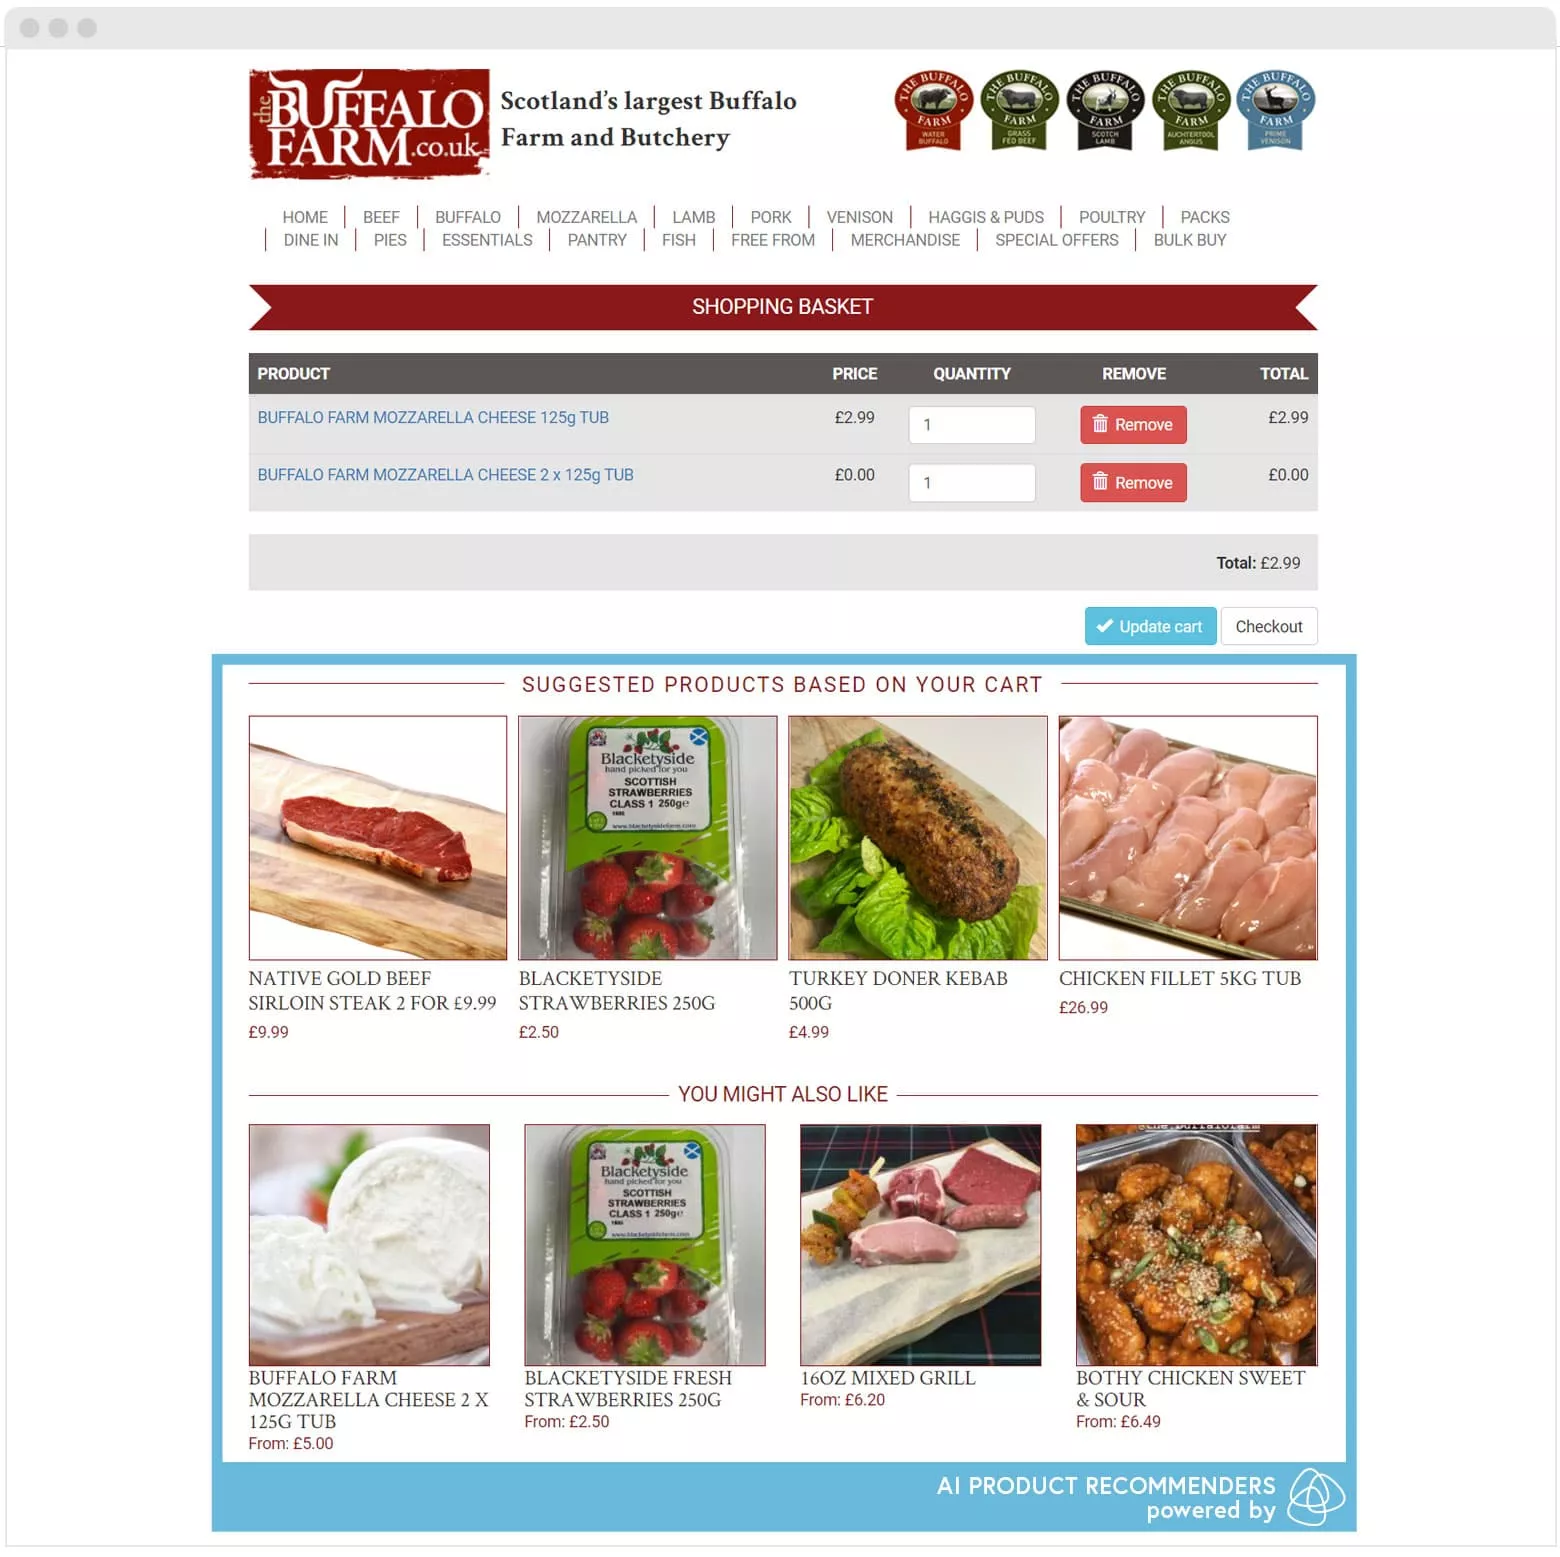 The Buffalo Farm’s use of AI product recommendations on the basket page